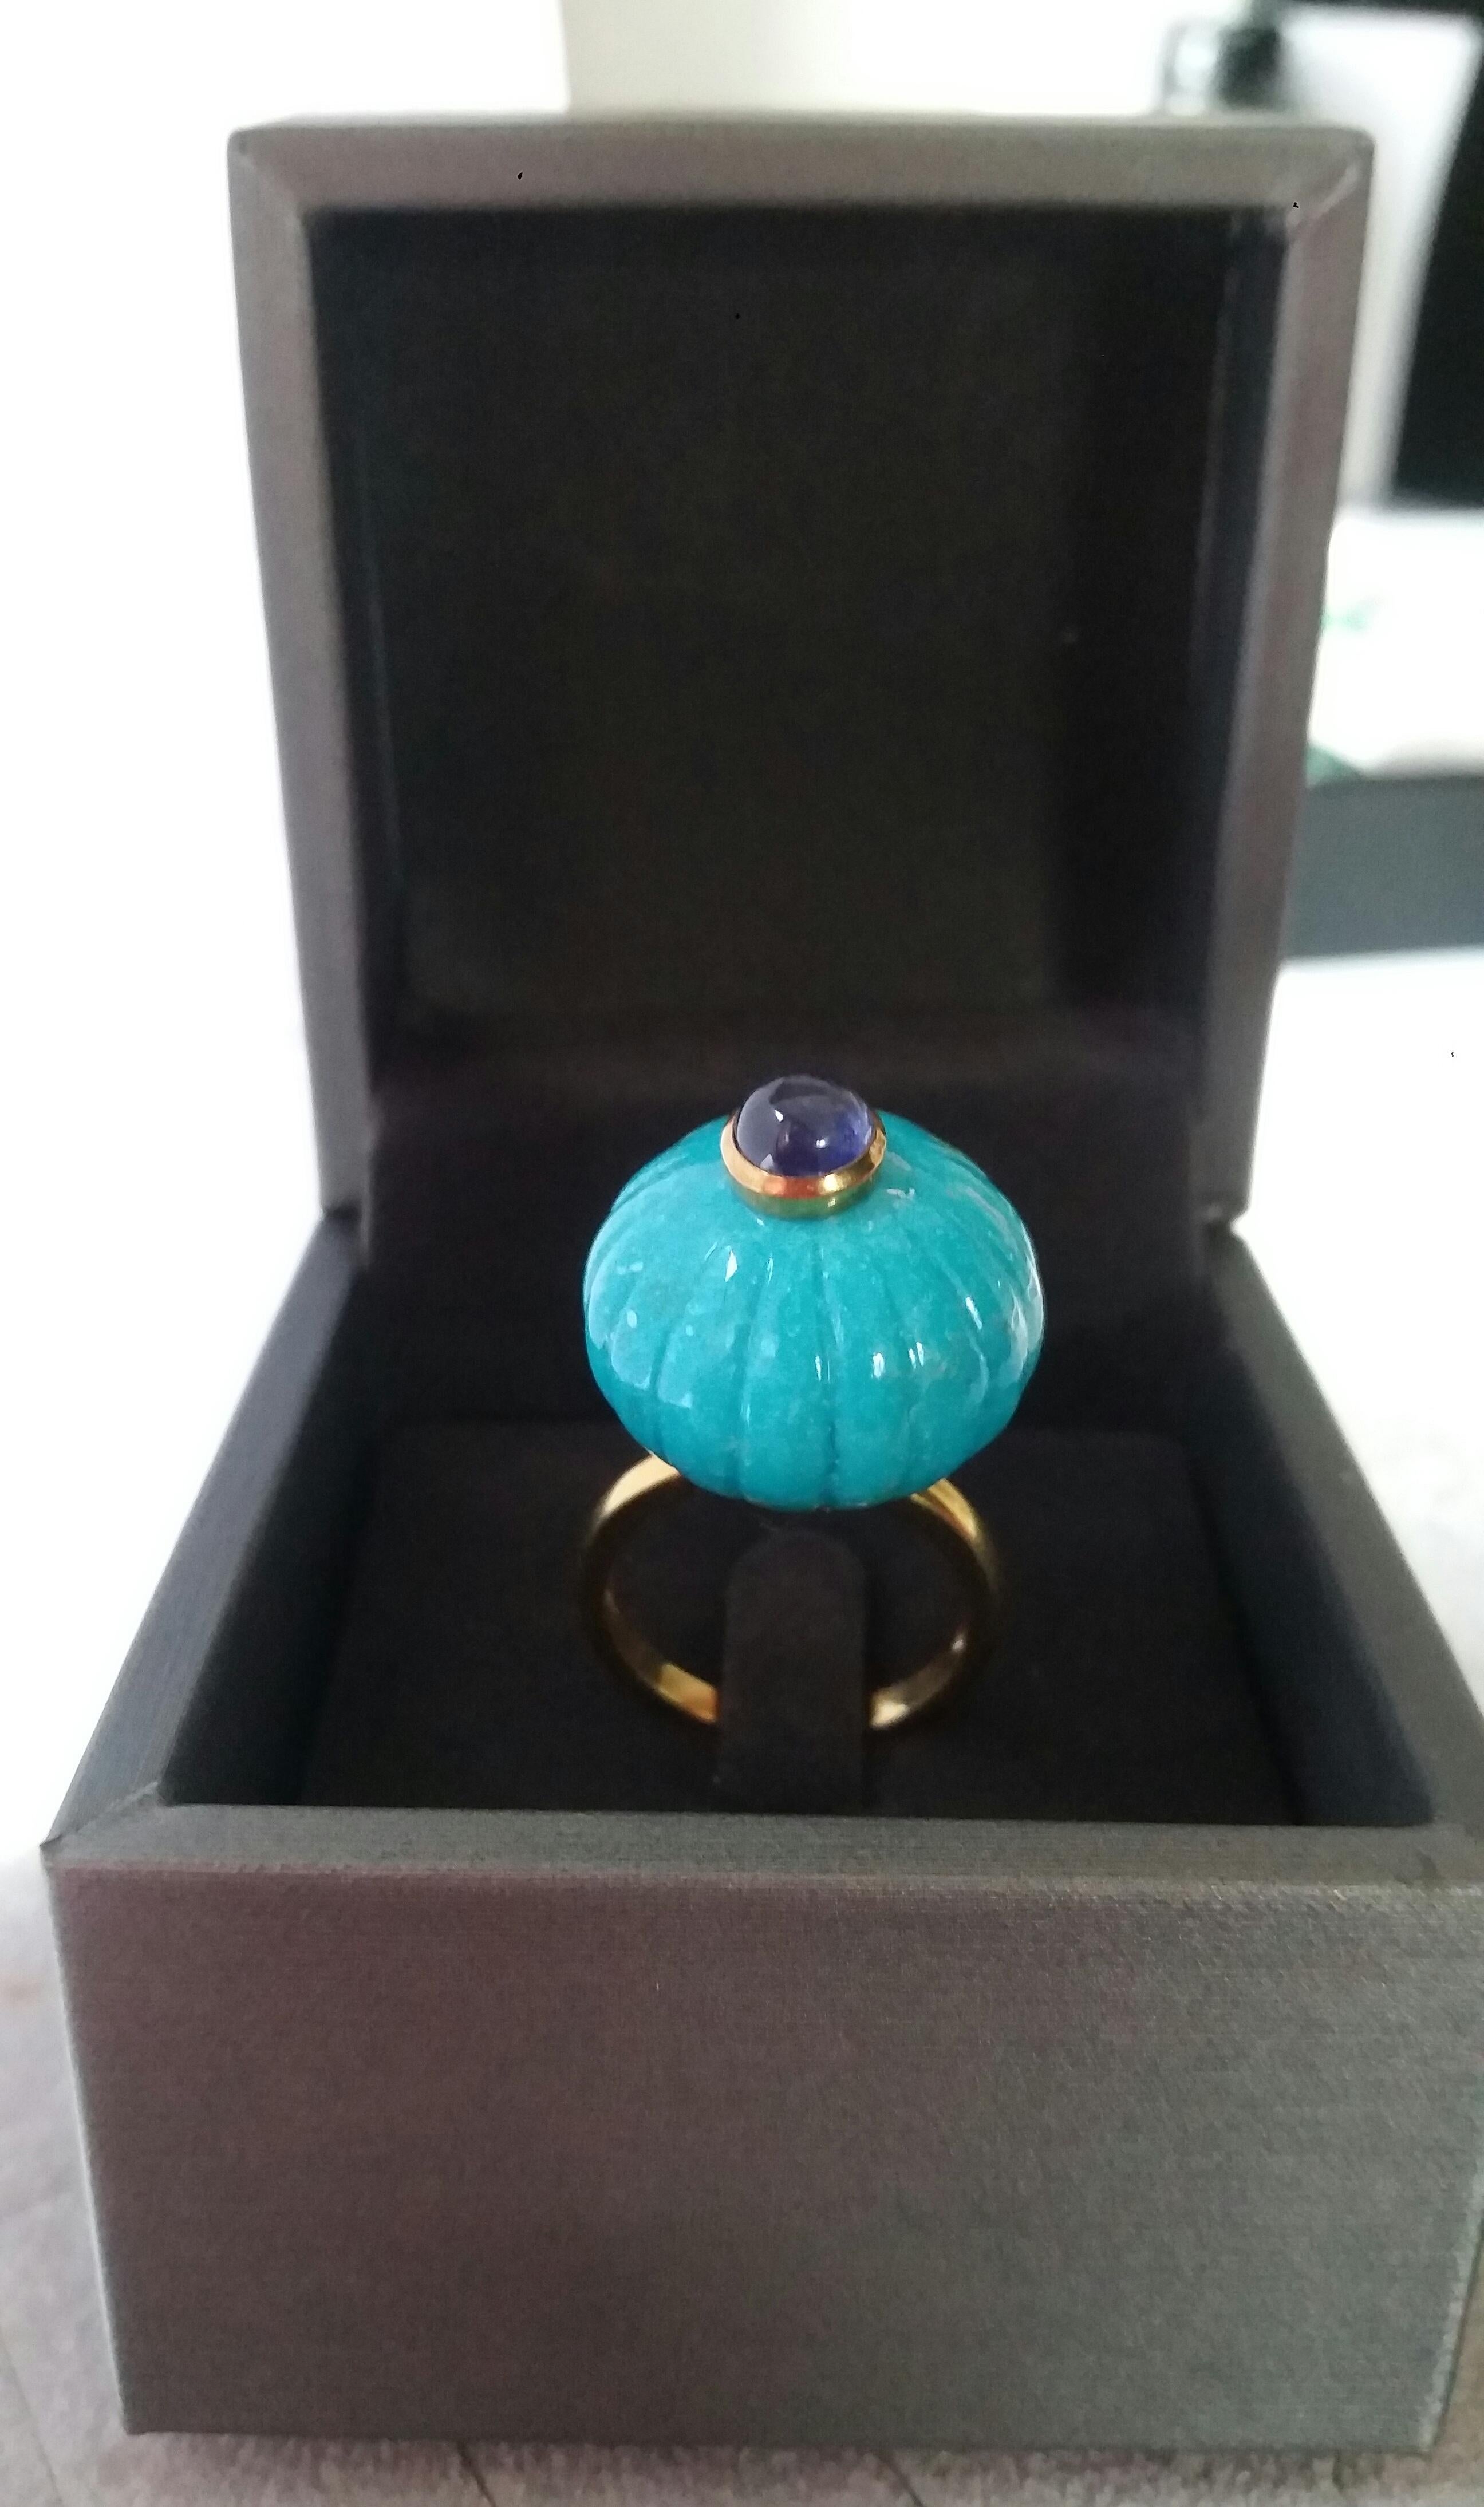 Melon cut Turquoise Round Bead  of 21 mm. in diameter and 16 mm. thick with in the center a round Blue Sapphire cabochon of 8 mm. in diameter  is mounted on top of a 14 Kt. yellow gold shank.
In 1978 our workshop started in Italy to make simple-chic